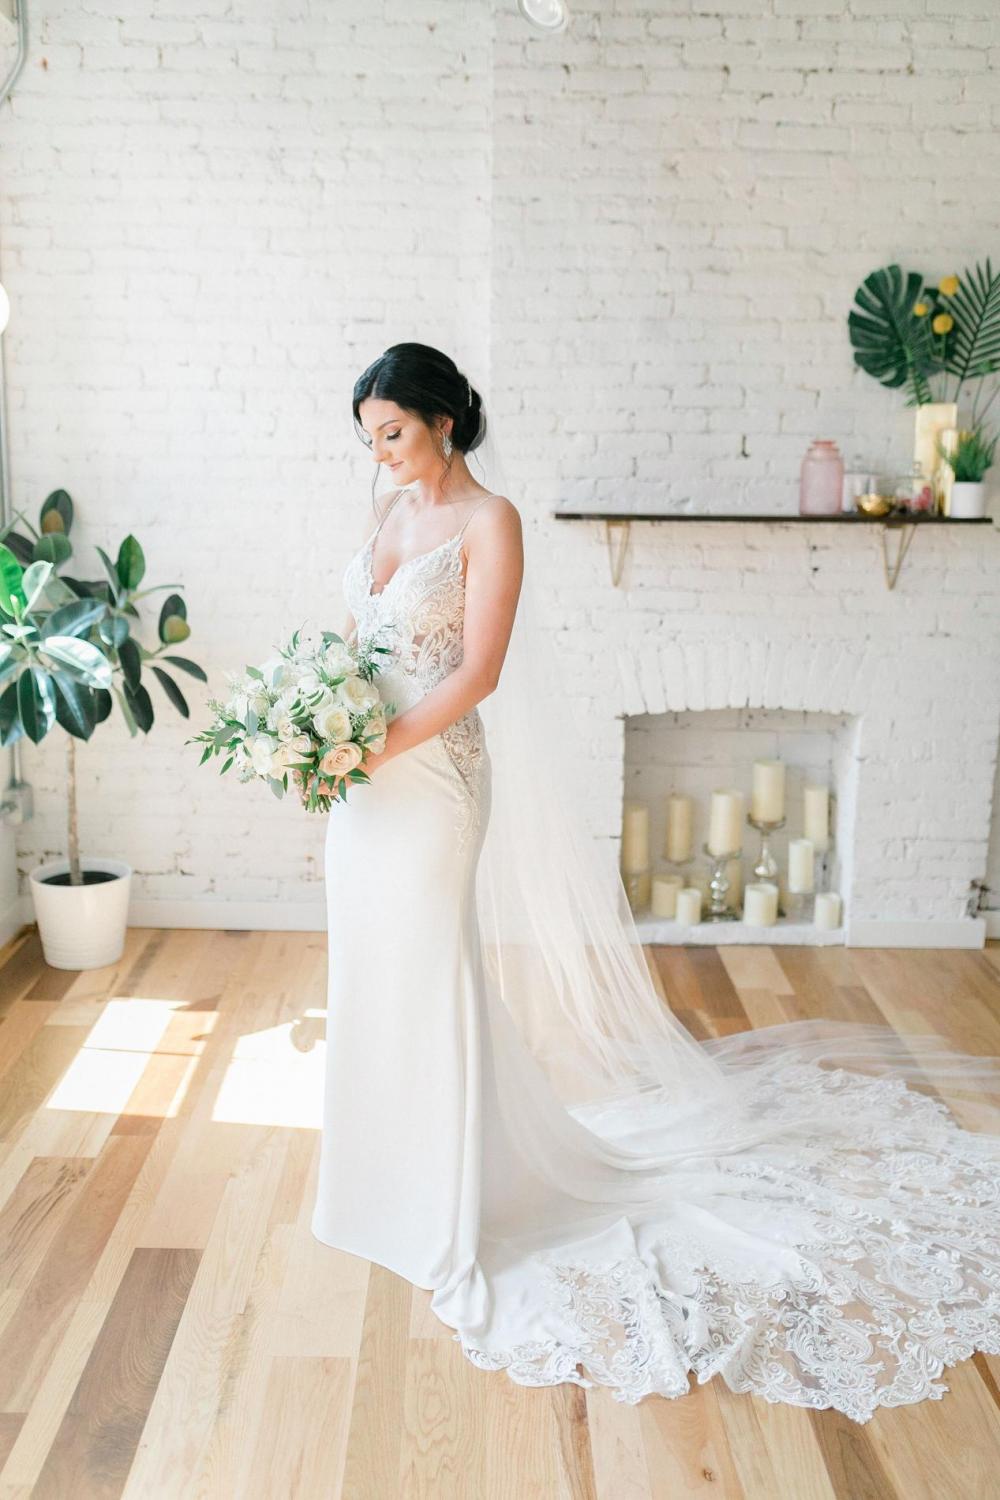 This Cleveland Ceremony Has Gorgeous Hand-Picked Details You'll Love ...